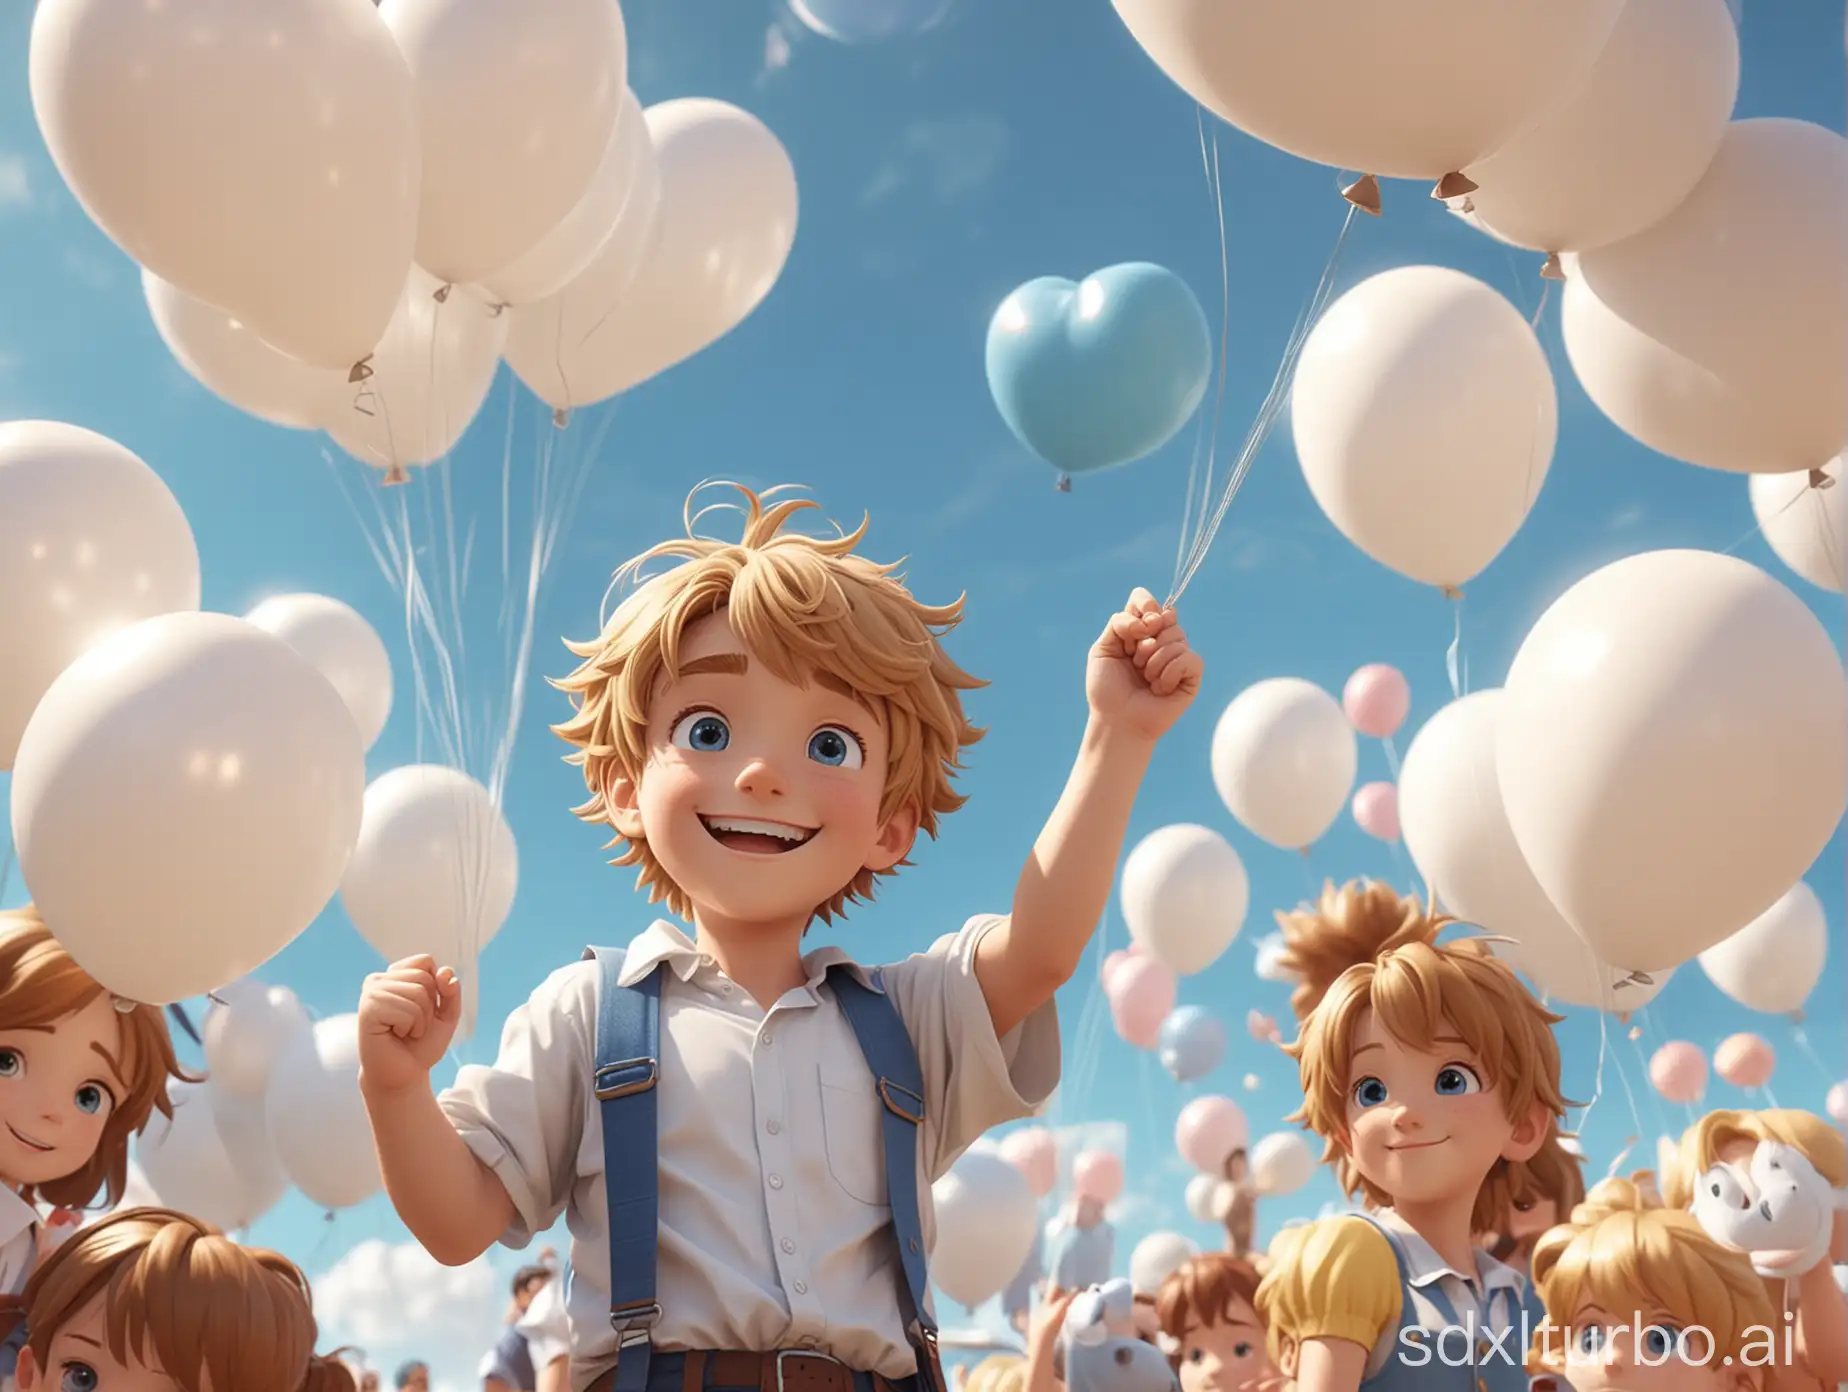 A ten-year-old smiling dreamy boy, with slightly curled golden hair, blue eyes, wearing a white short-sleeved shirt on top, a blue vest, brown shorts, and brown boots. 3D anime style. The little boy saw a huge balloon castle with balloons of various shapes inside. He jumped between the balloons, feeling like he was strolling in the sky. 3D anime style.